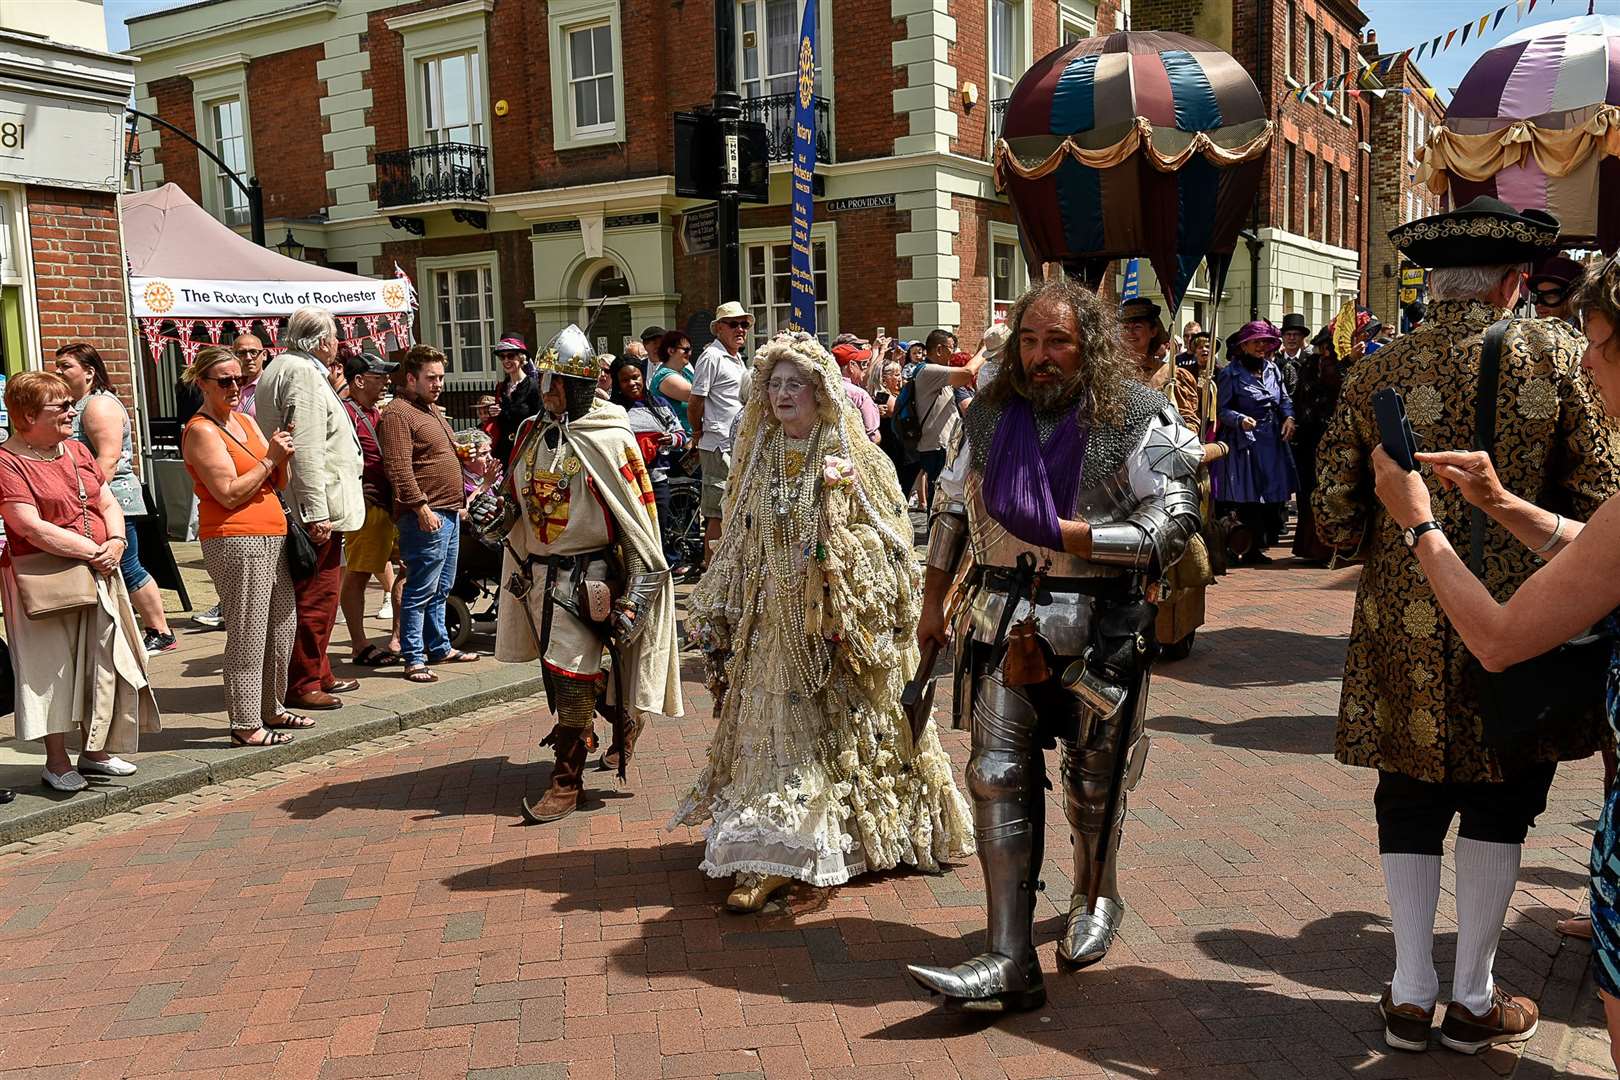 Parade through Rochester for the Dickens Festival 2019. It is one of the events to fall victim to the coronavirus outbreak